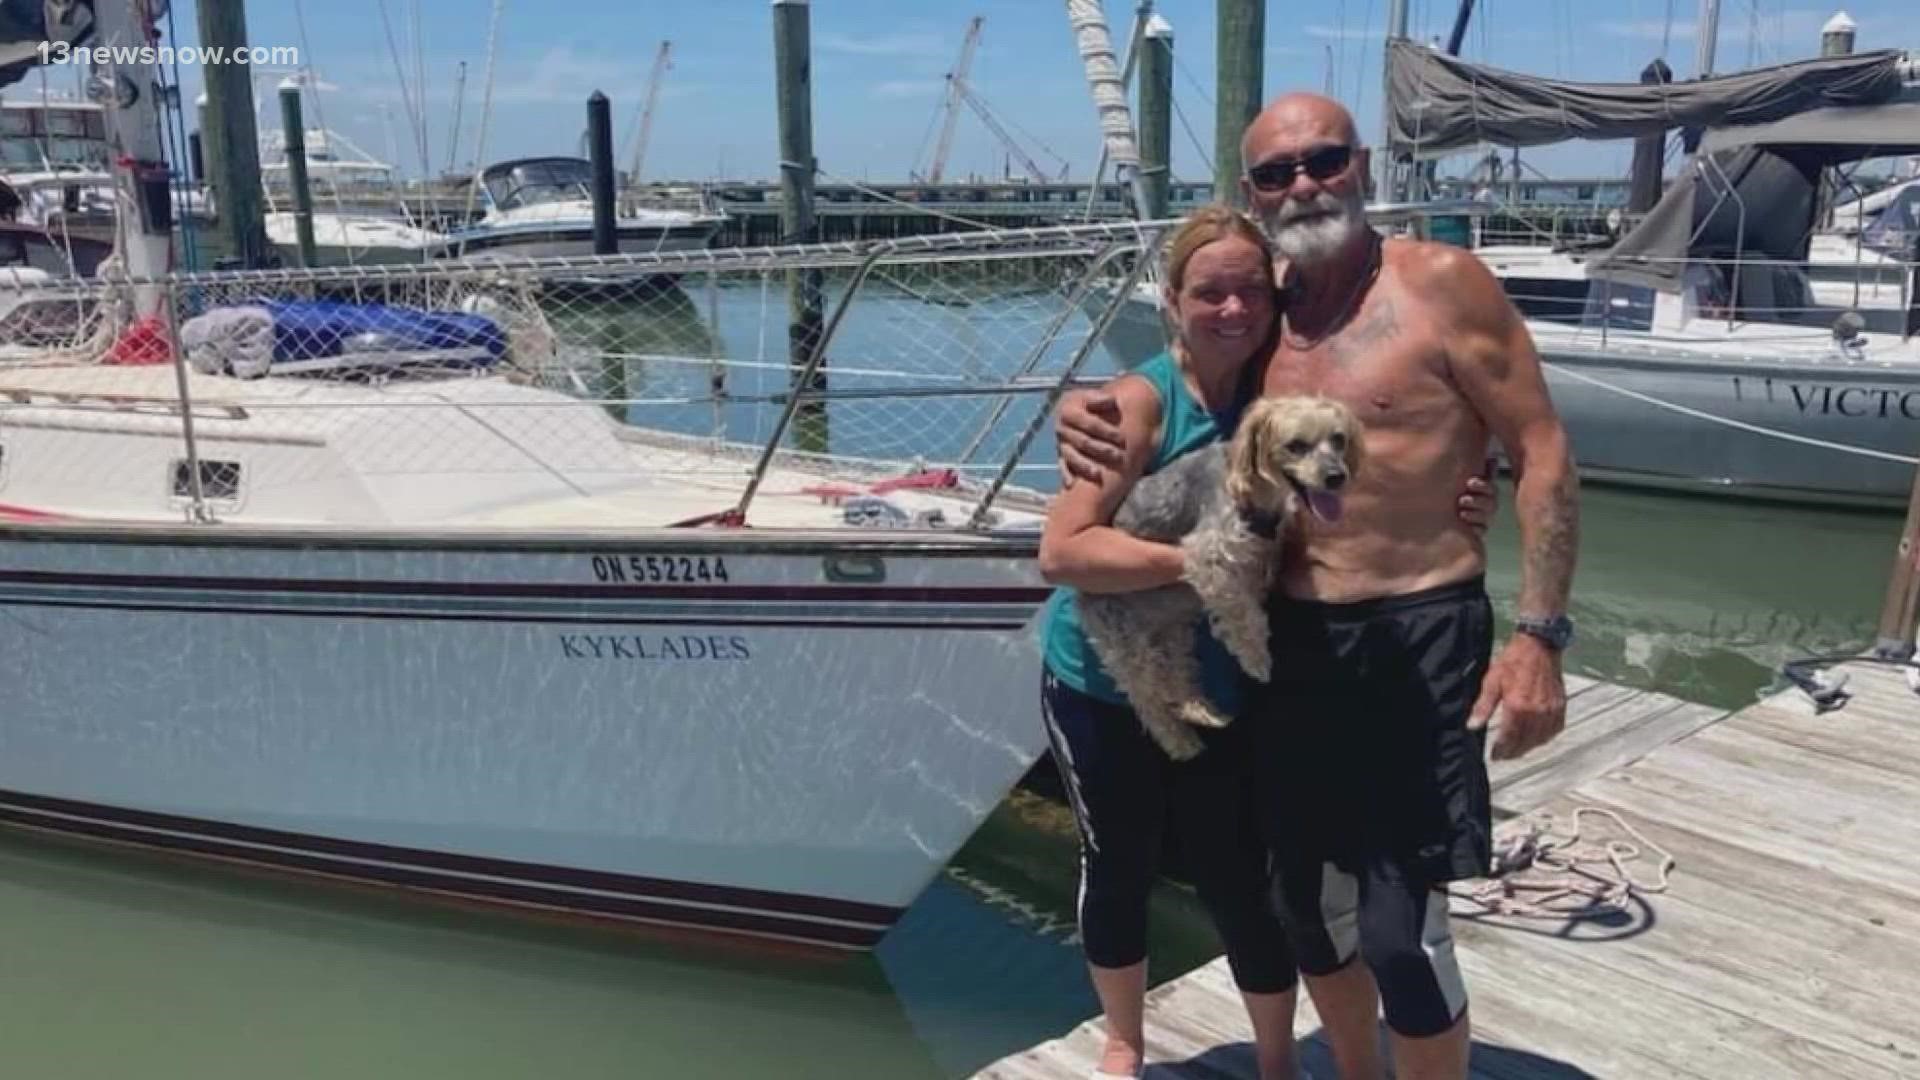 The couple was on their way to Europe when they ran into a storm that knocked out power and the navigation system on their boat.